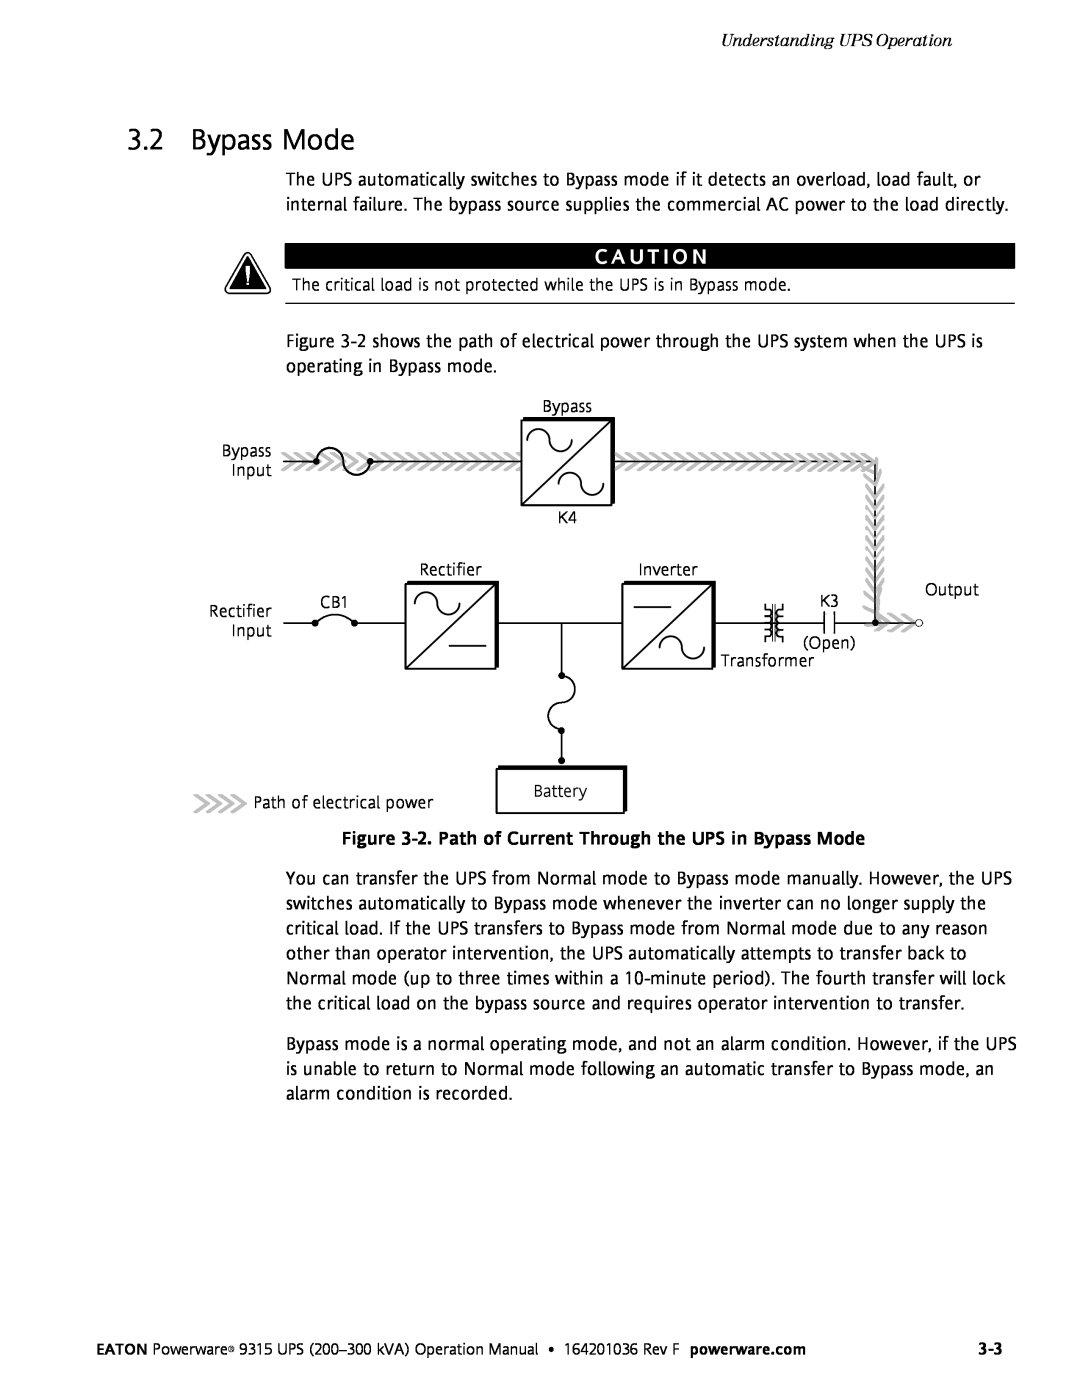 Eaton Electrical Powerware 9315 operation manual C A U T I O N, 2. Path of Current Through the UPS in Bypass Mode 